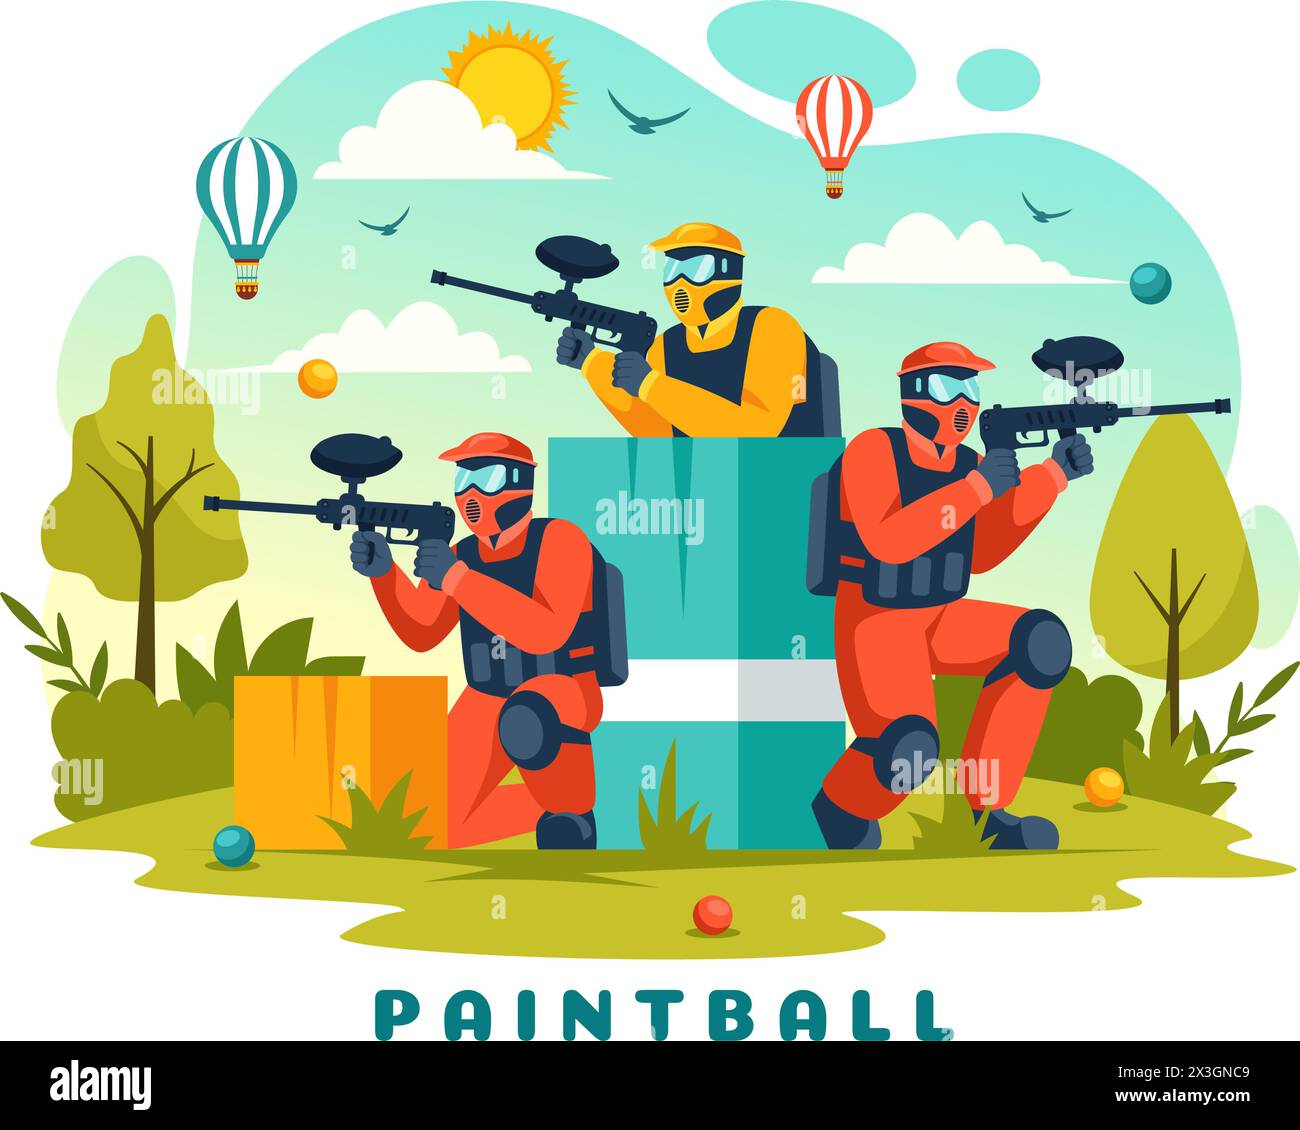 People Playing Paintball Vector Illustration of Fighter Player Shooting with Gun Shoot, Aim, Attack in Field Scene in Flat Cartoon Background Stock Vector